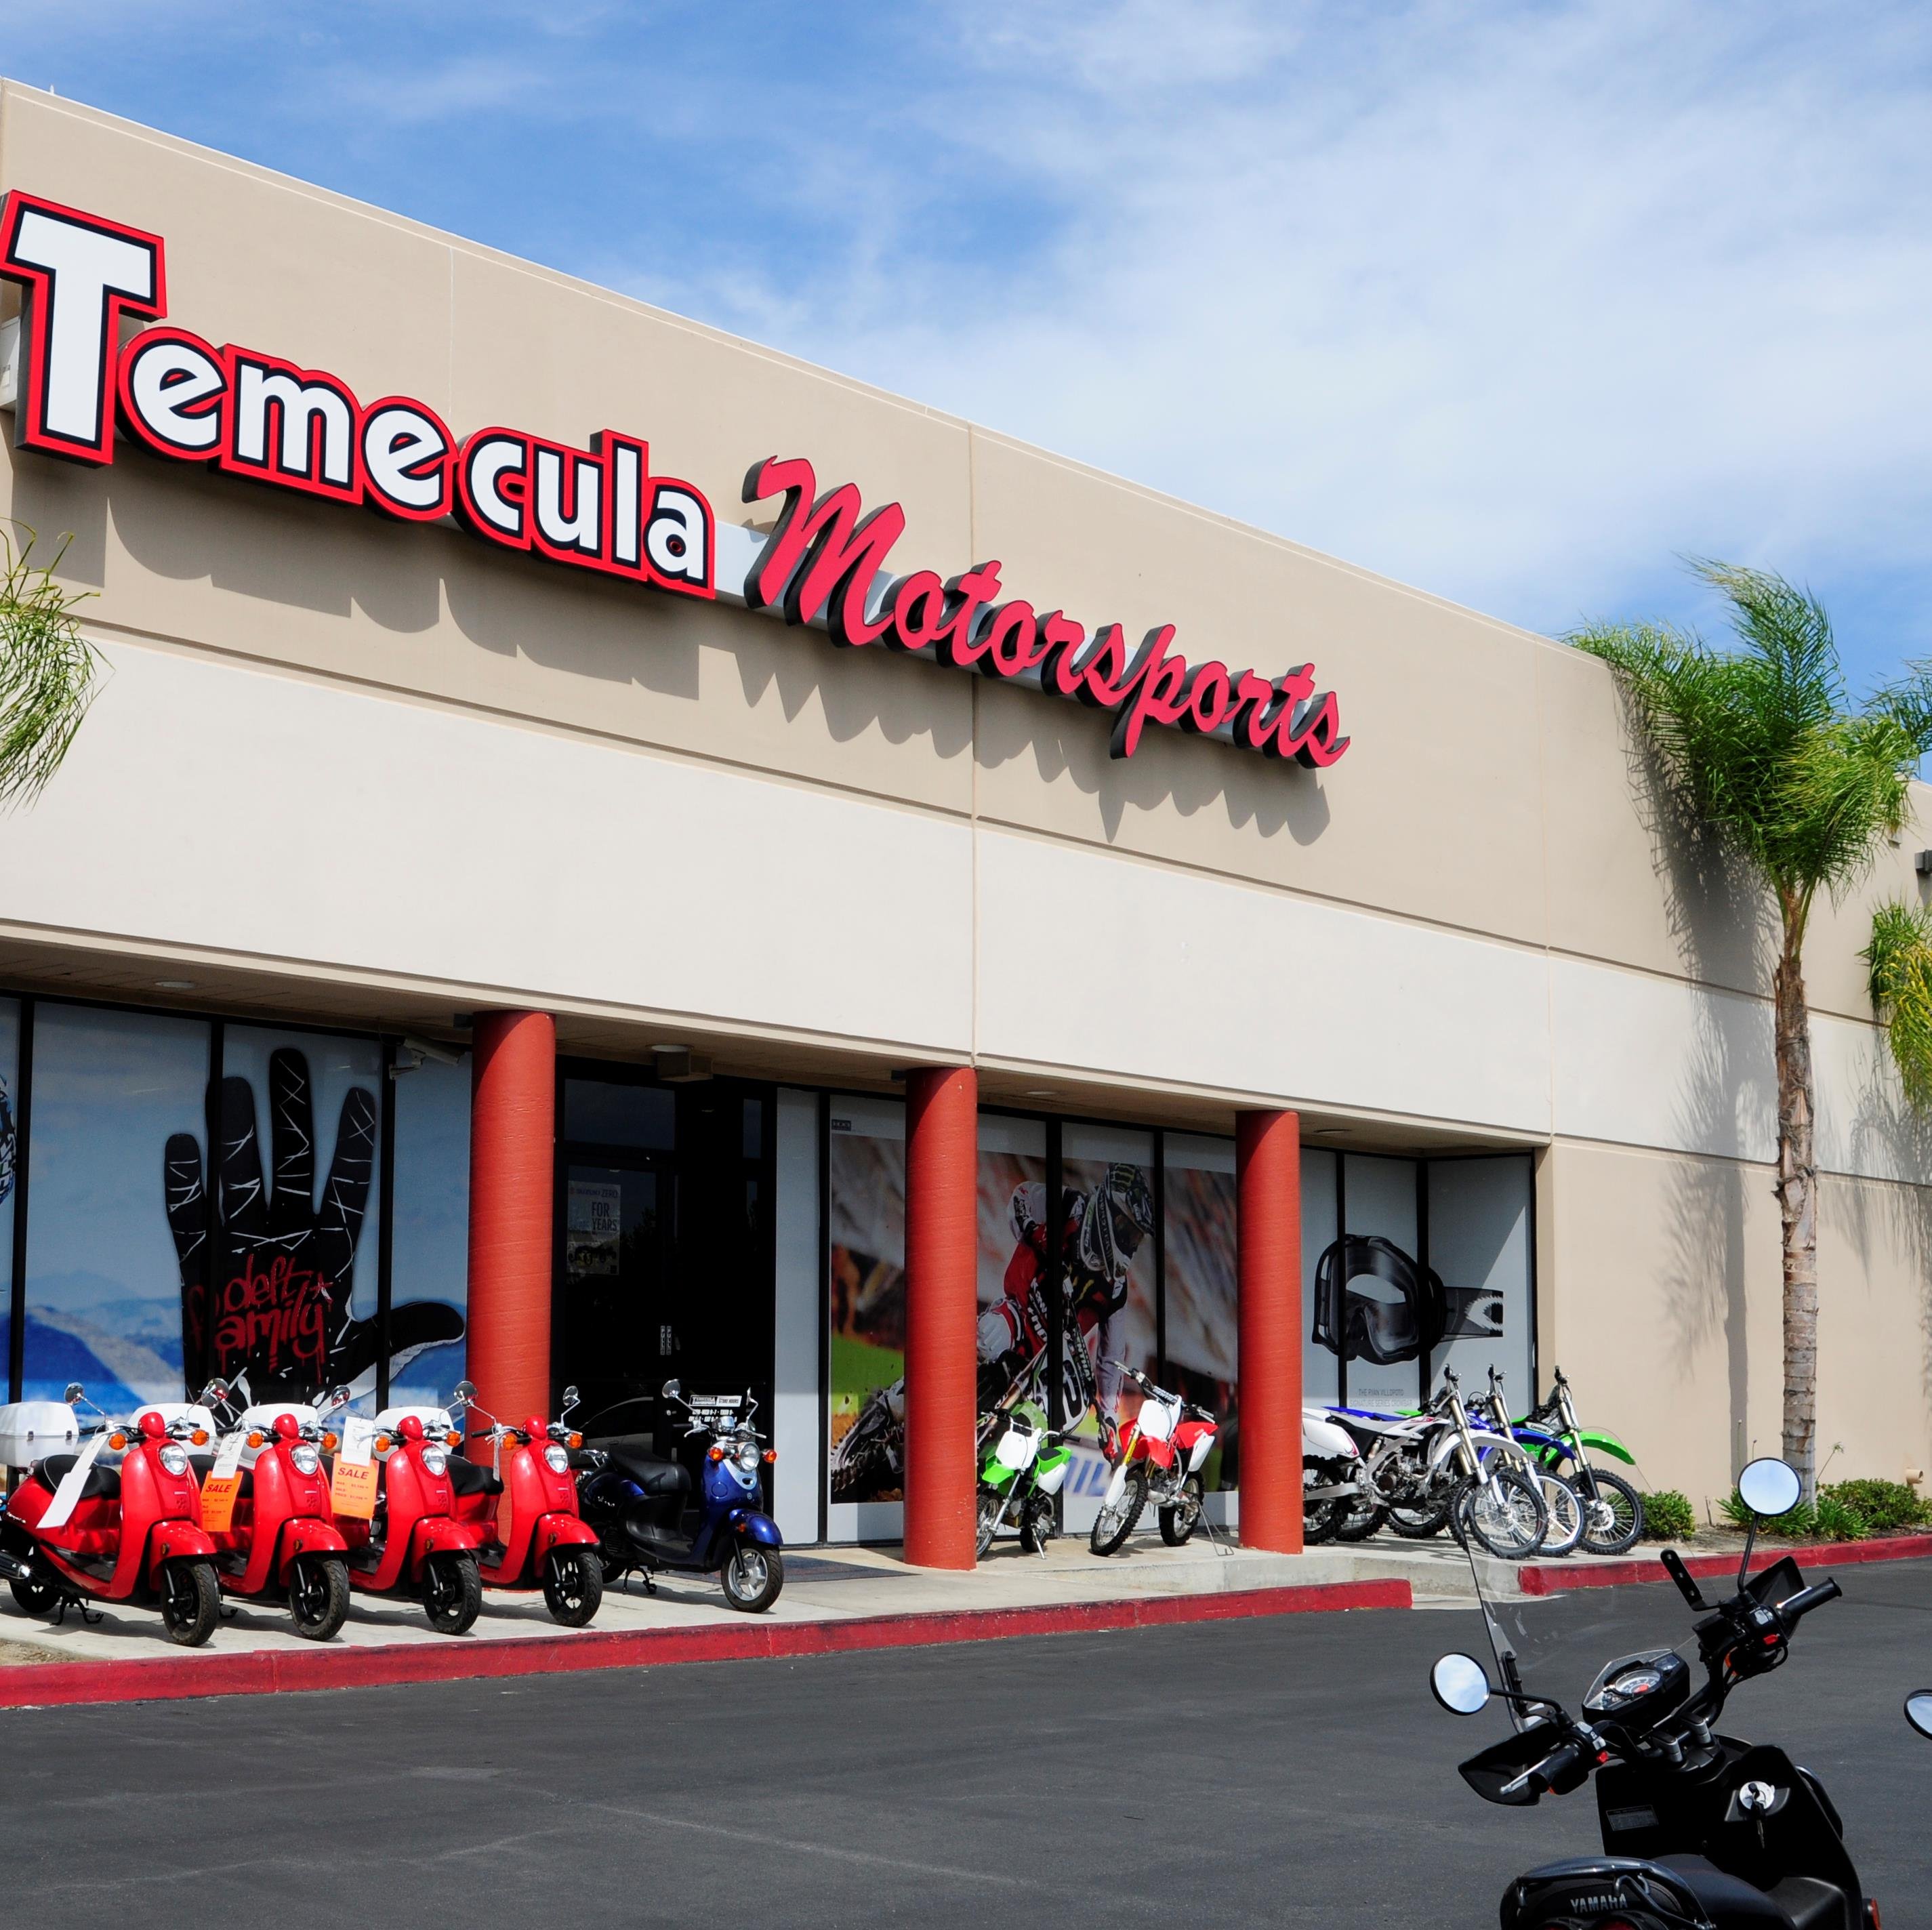 Temecula Motorsports stocks new & used motorcycles, ATVs, utility vehicles, dirt bikes & more. 951-698-4123 http://t.co/RS6qlBygKL